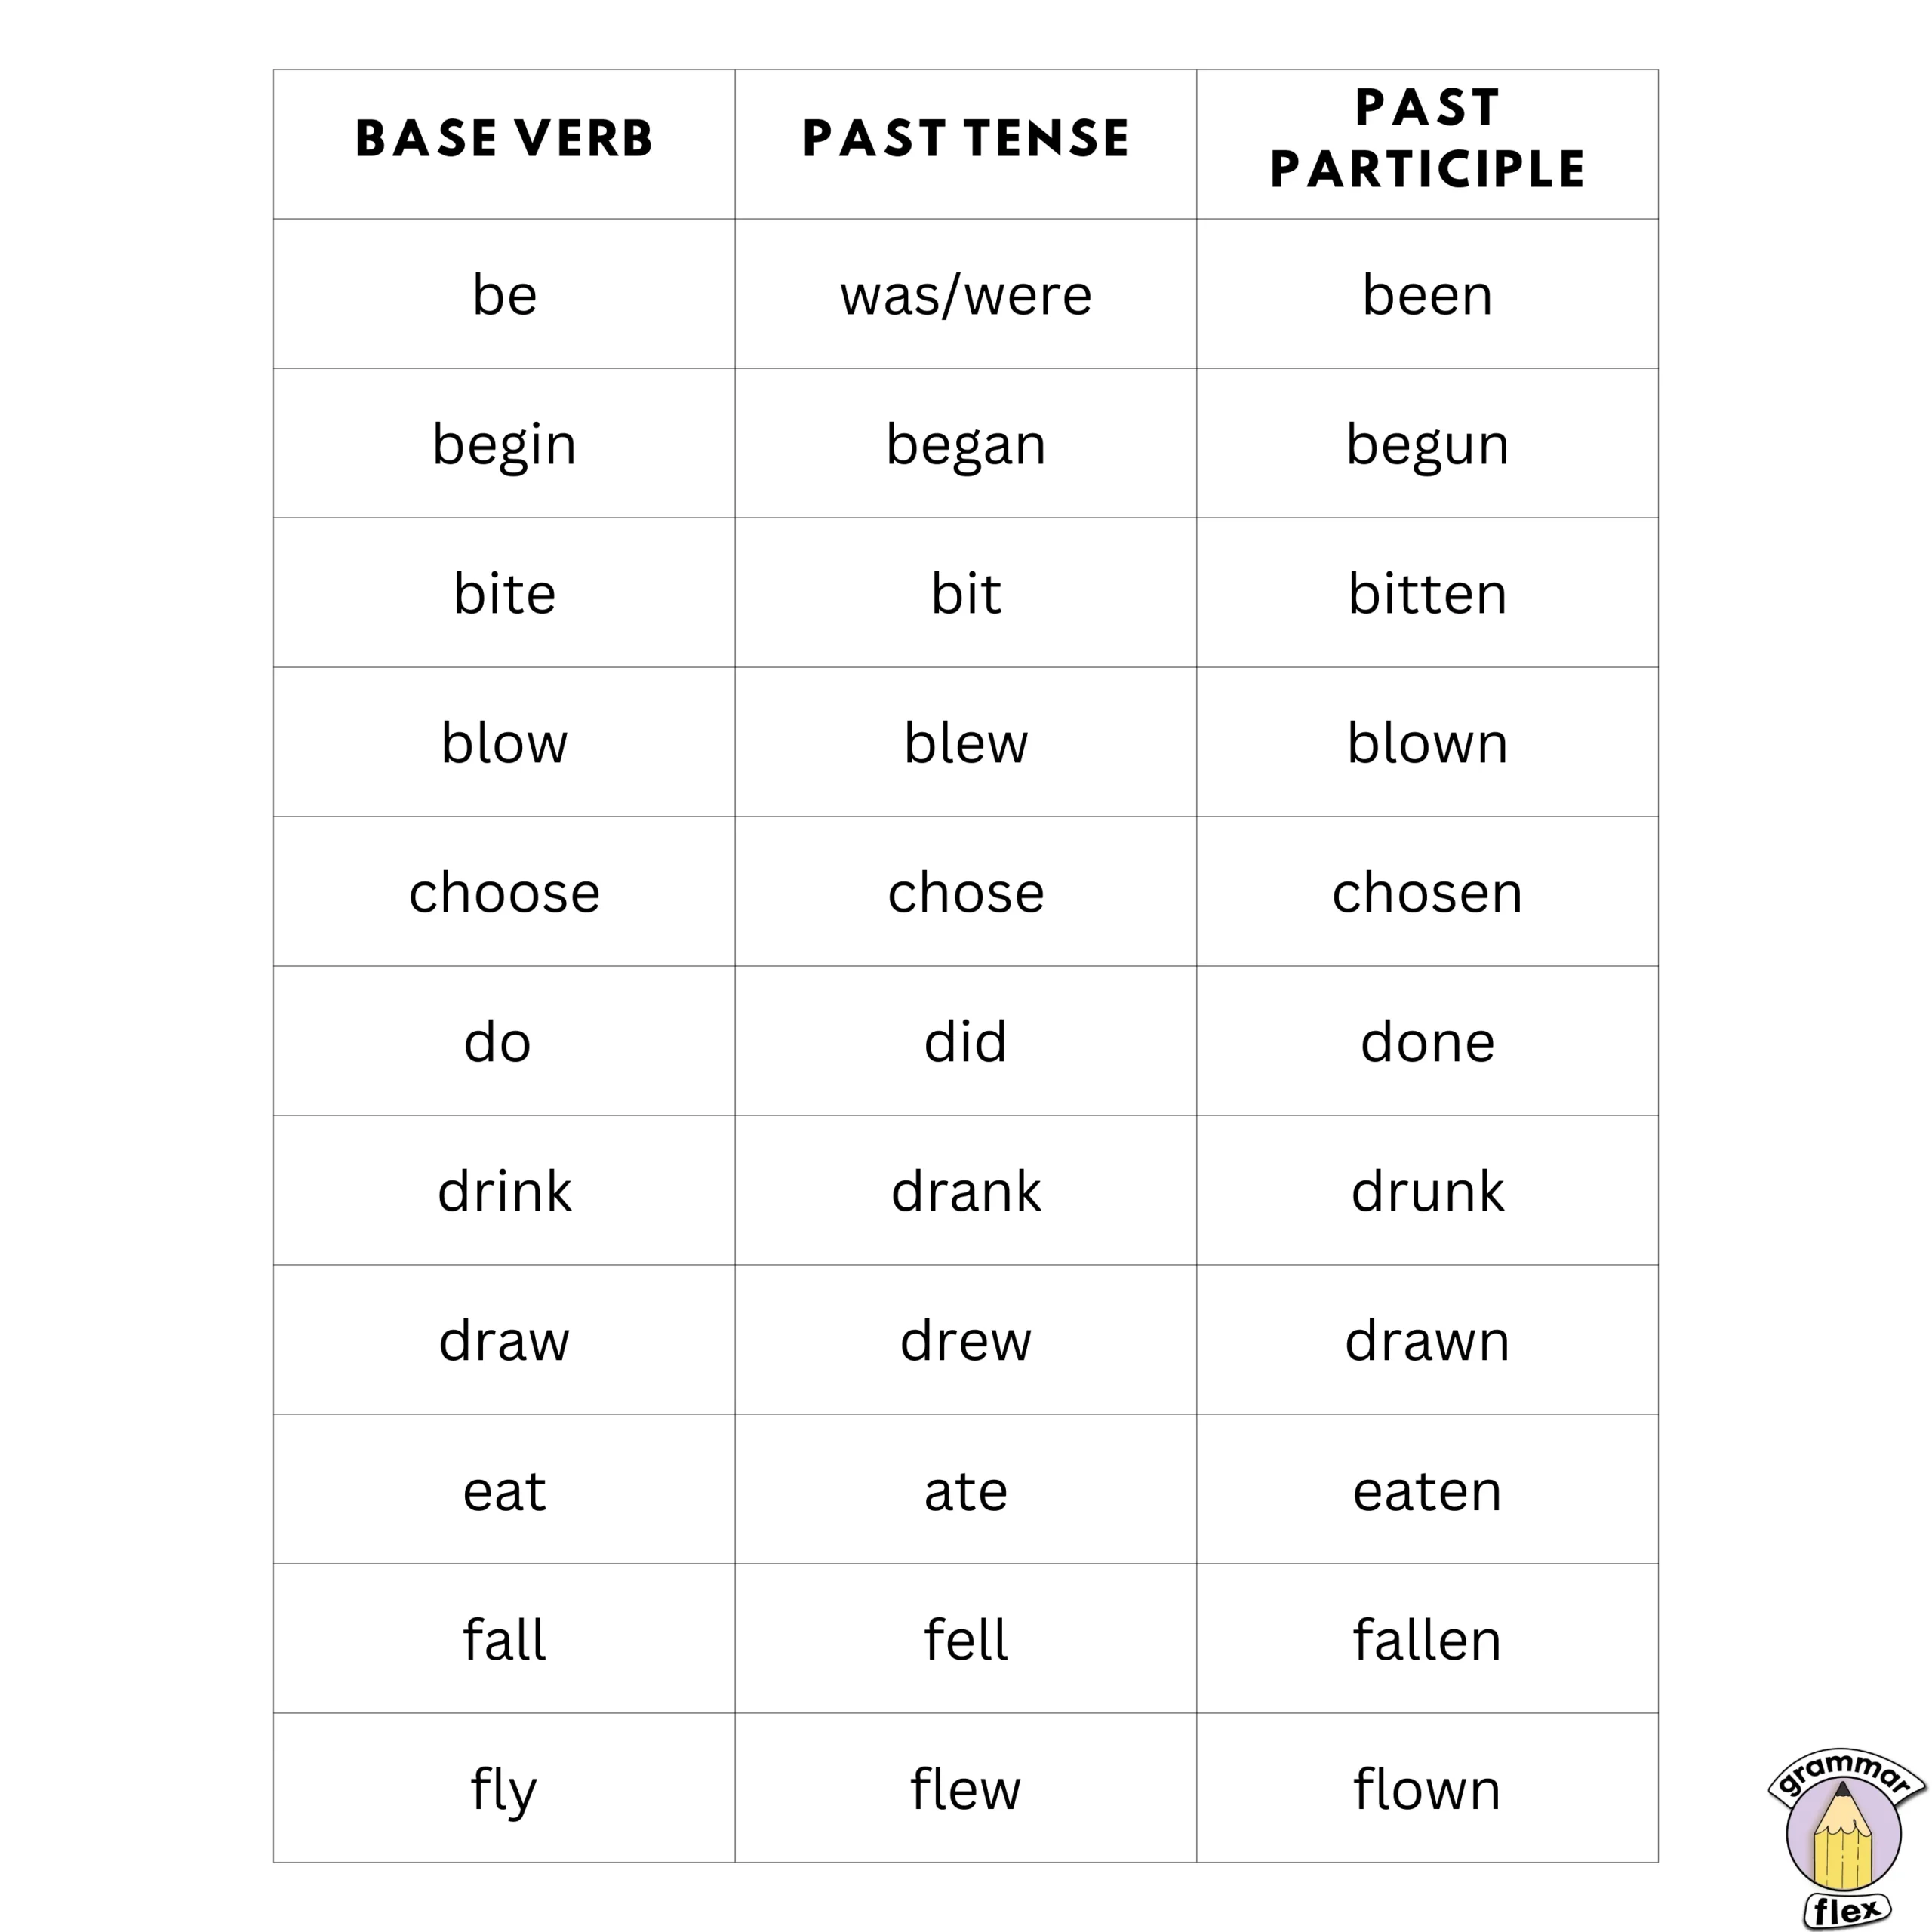 Irregular verbs with 3 forms. By Gflex on Canva.